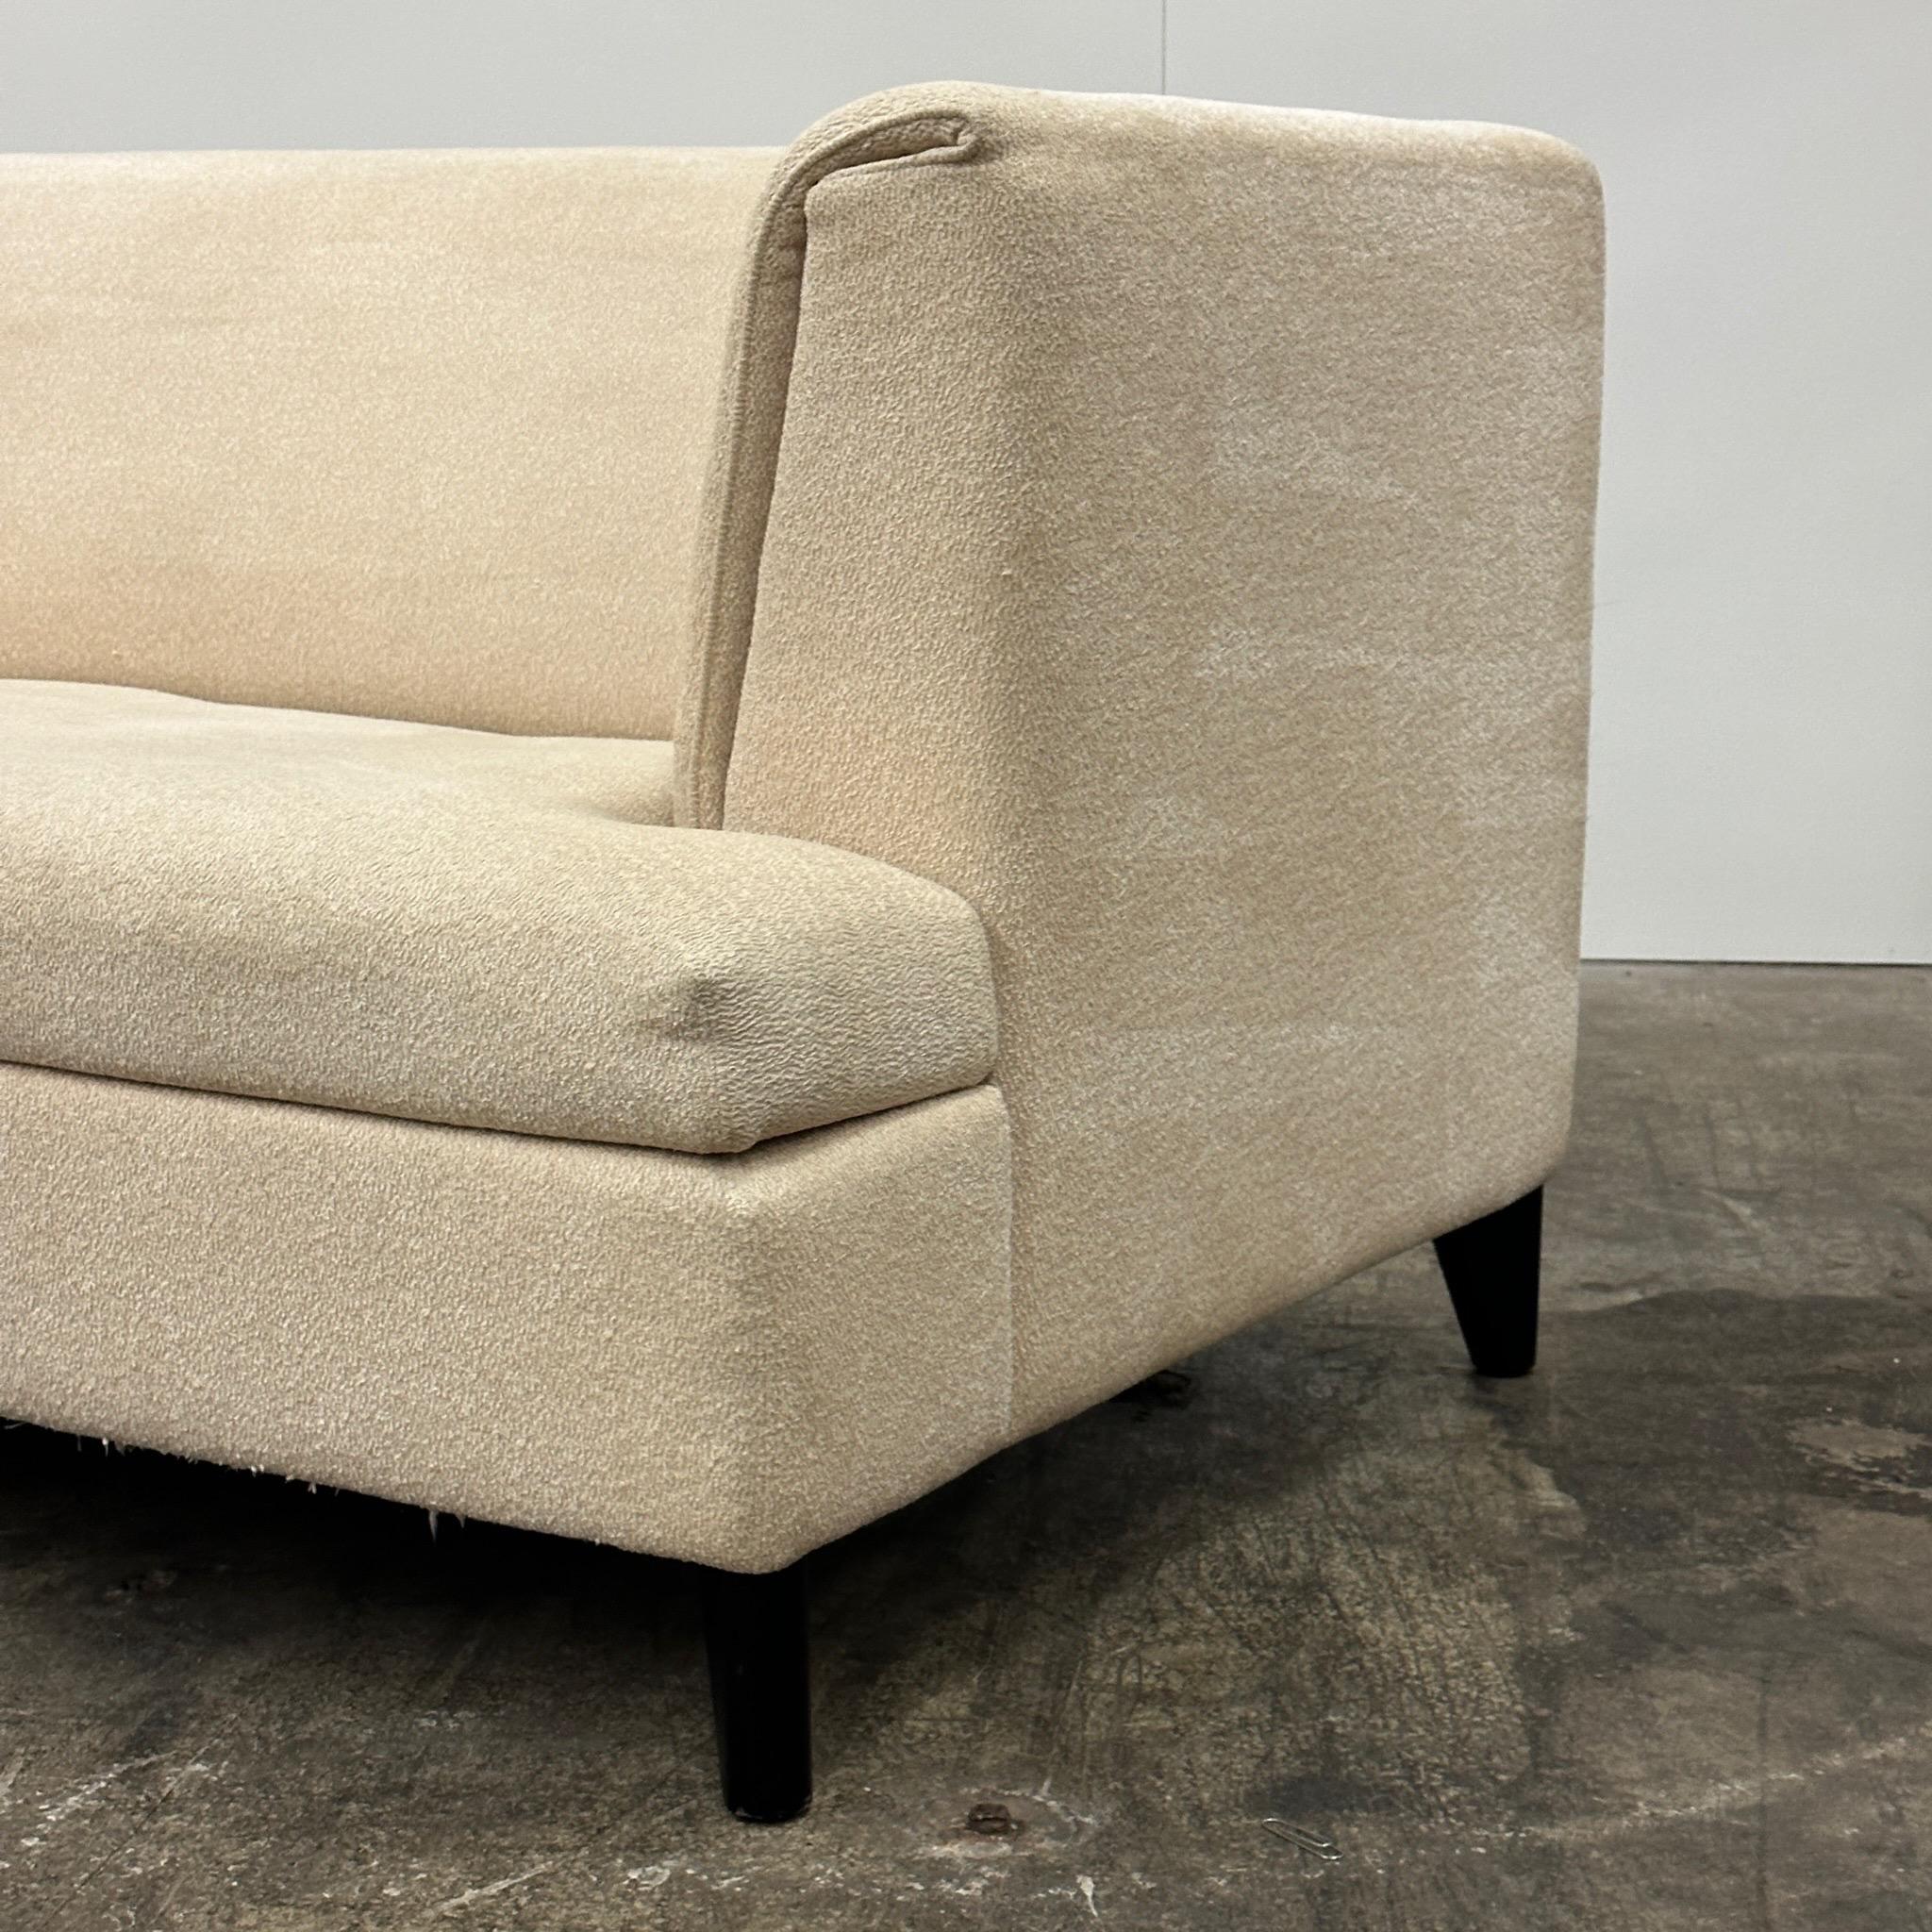 c.2000s. Upholstered in white fabric with black leg accents. Designed by Paolo Piva for Wittmann. 